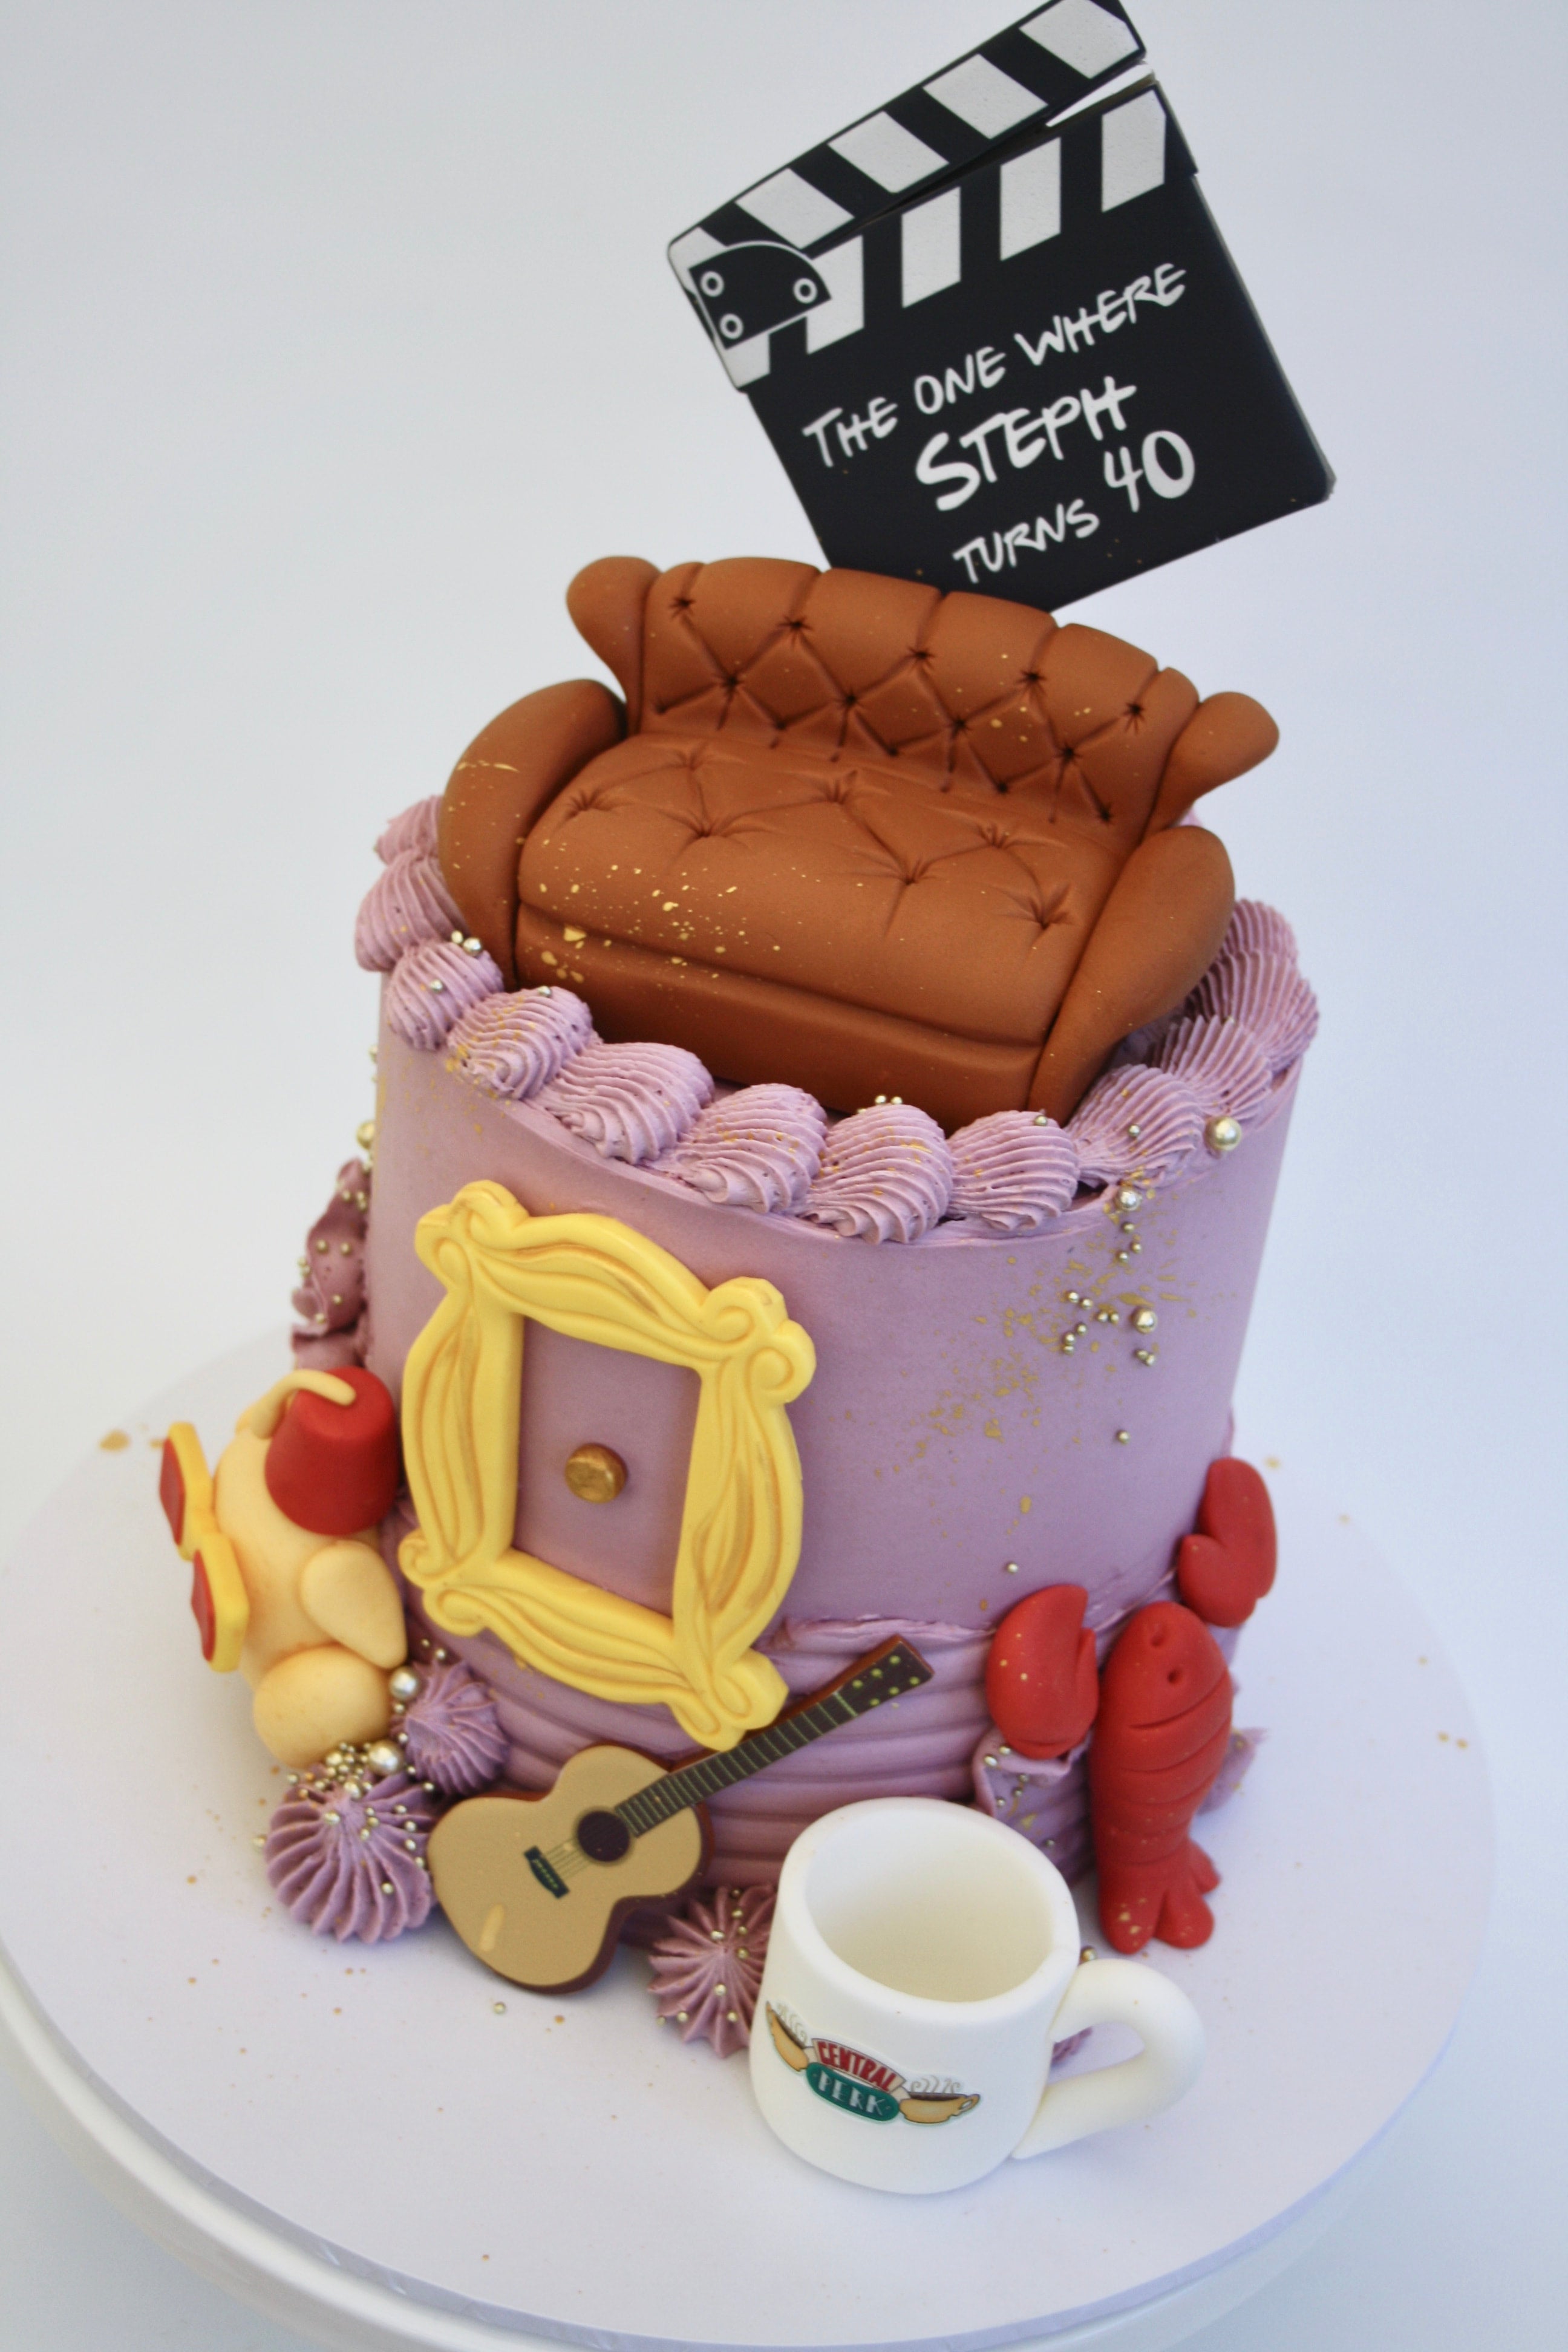 Friends Cake - Bakers Talent - Exotic Desserts, Customized Cakes, Macarons,  Cupcakes